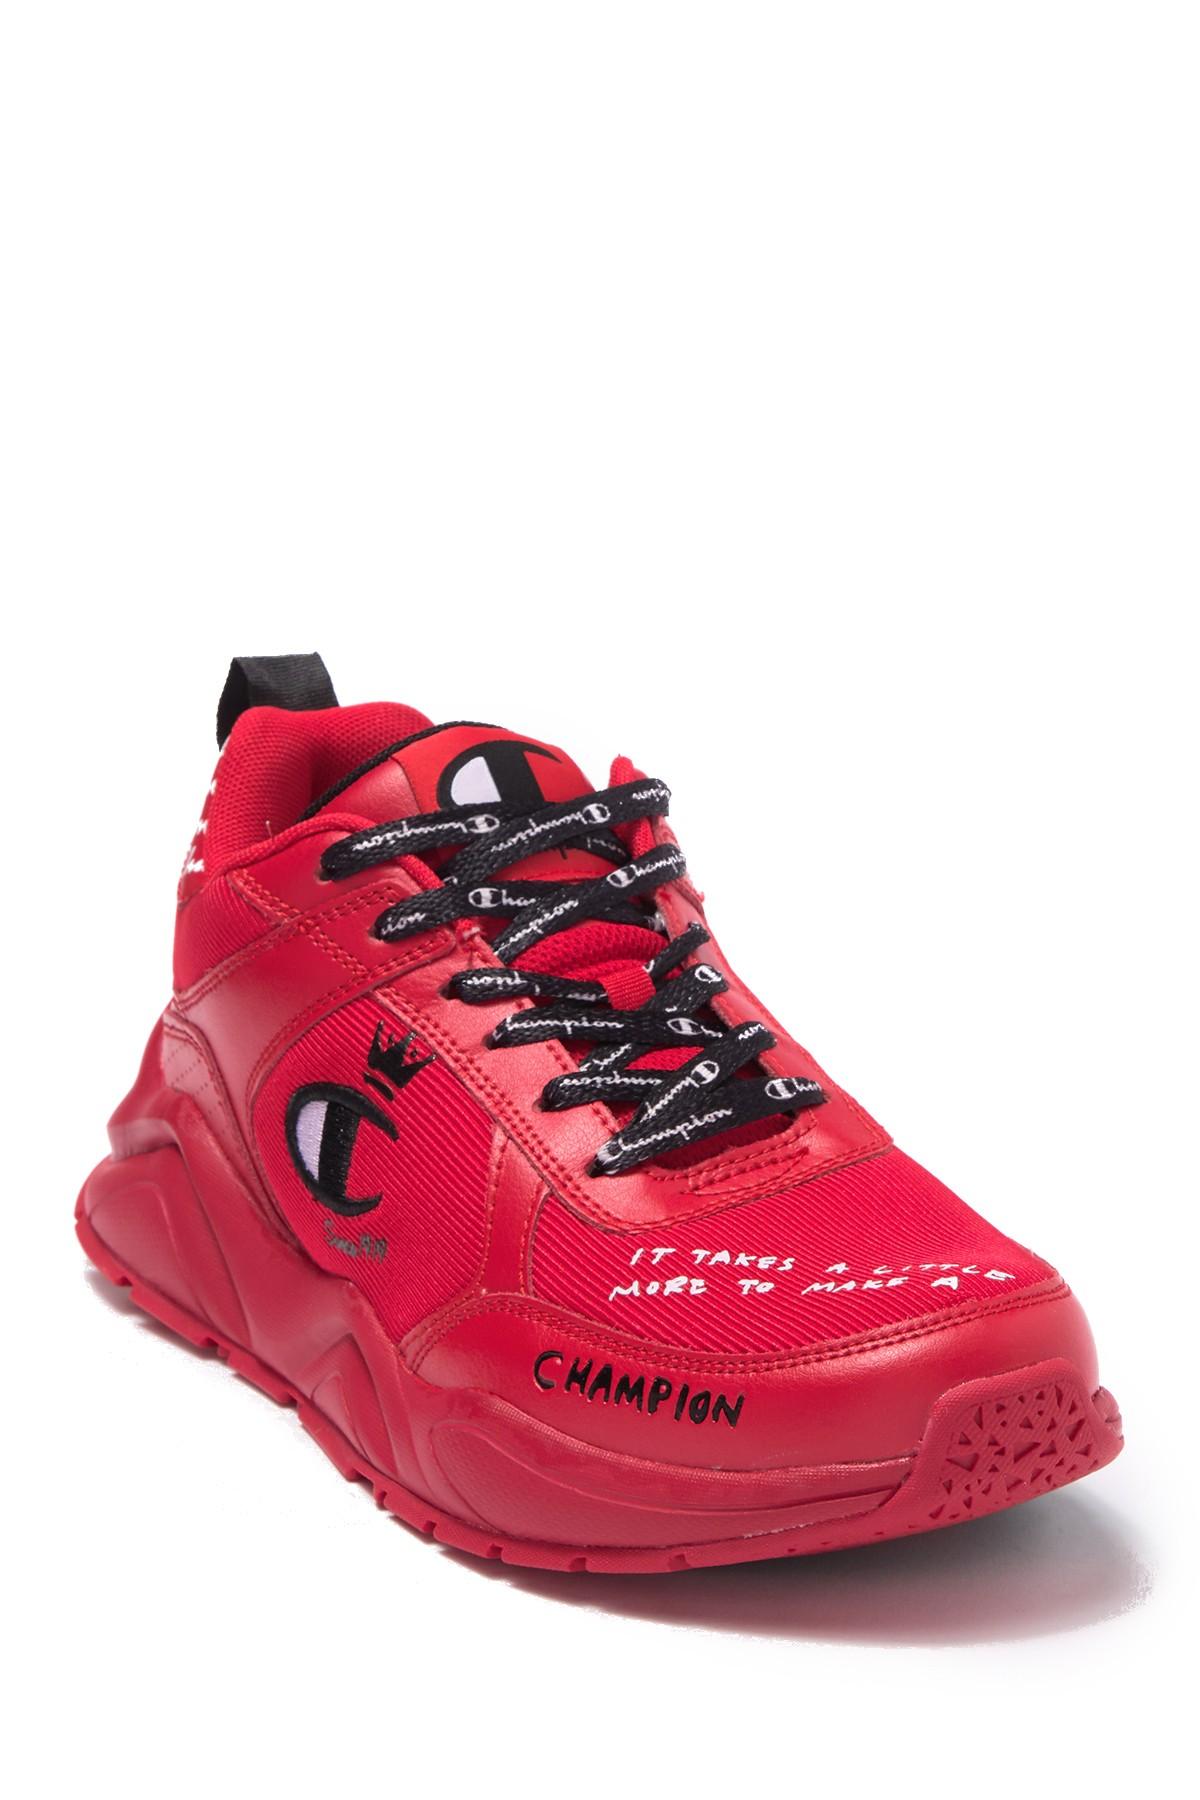 Champion Leather 93eighteen King Sneaker in Red for Men - Lyst